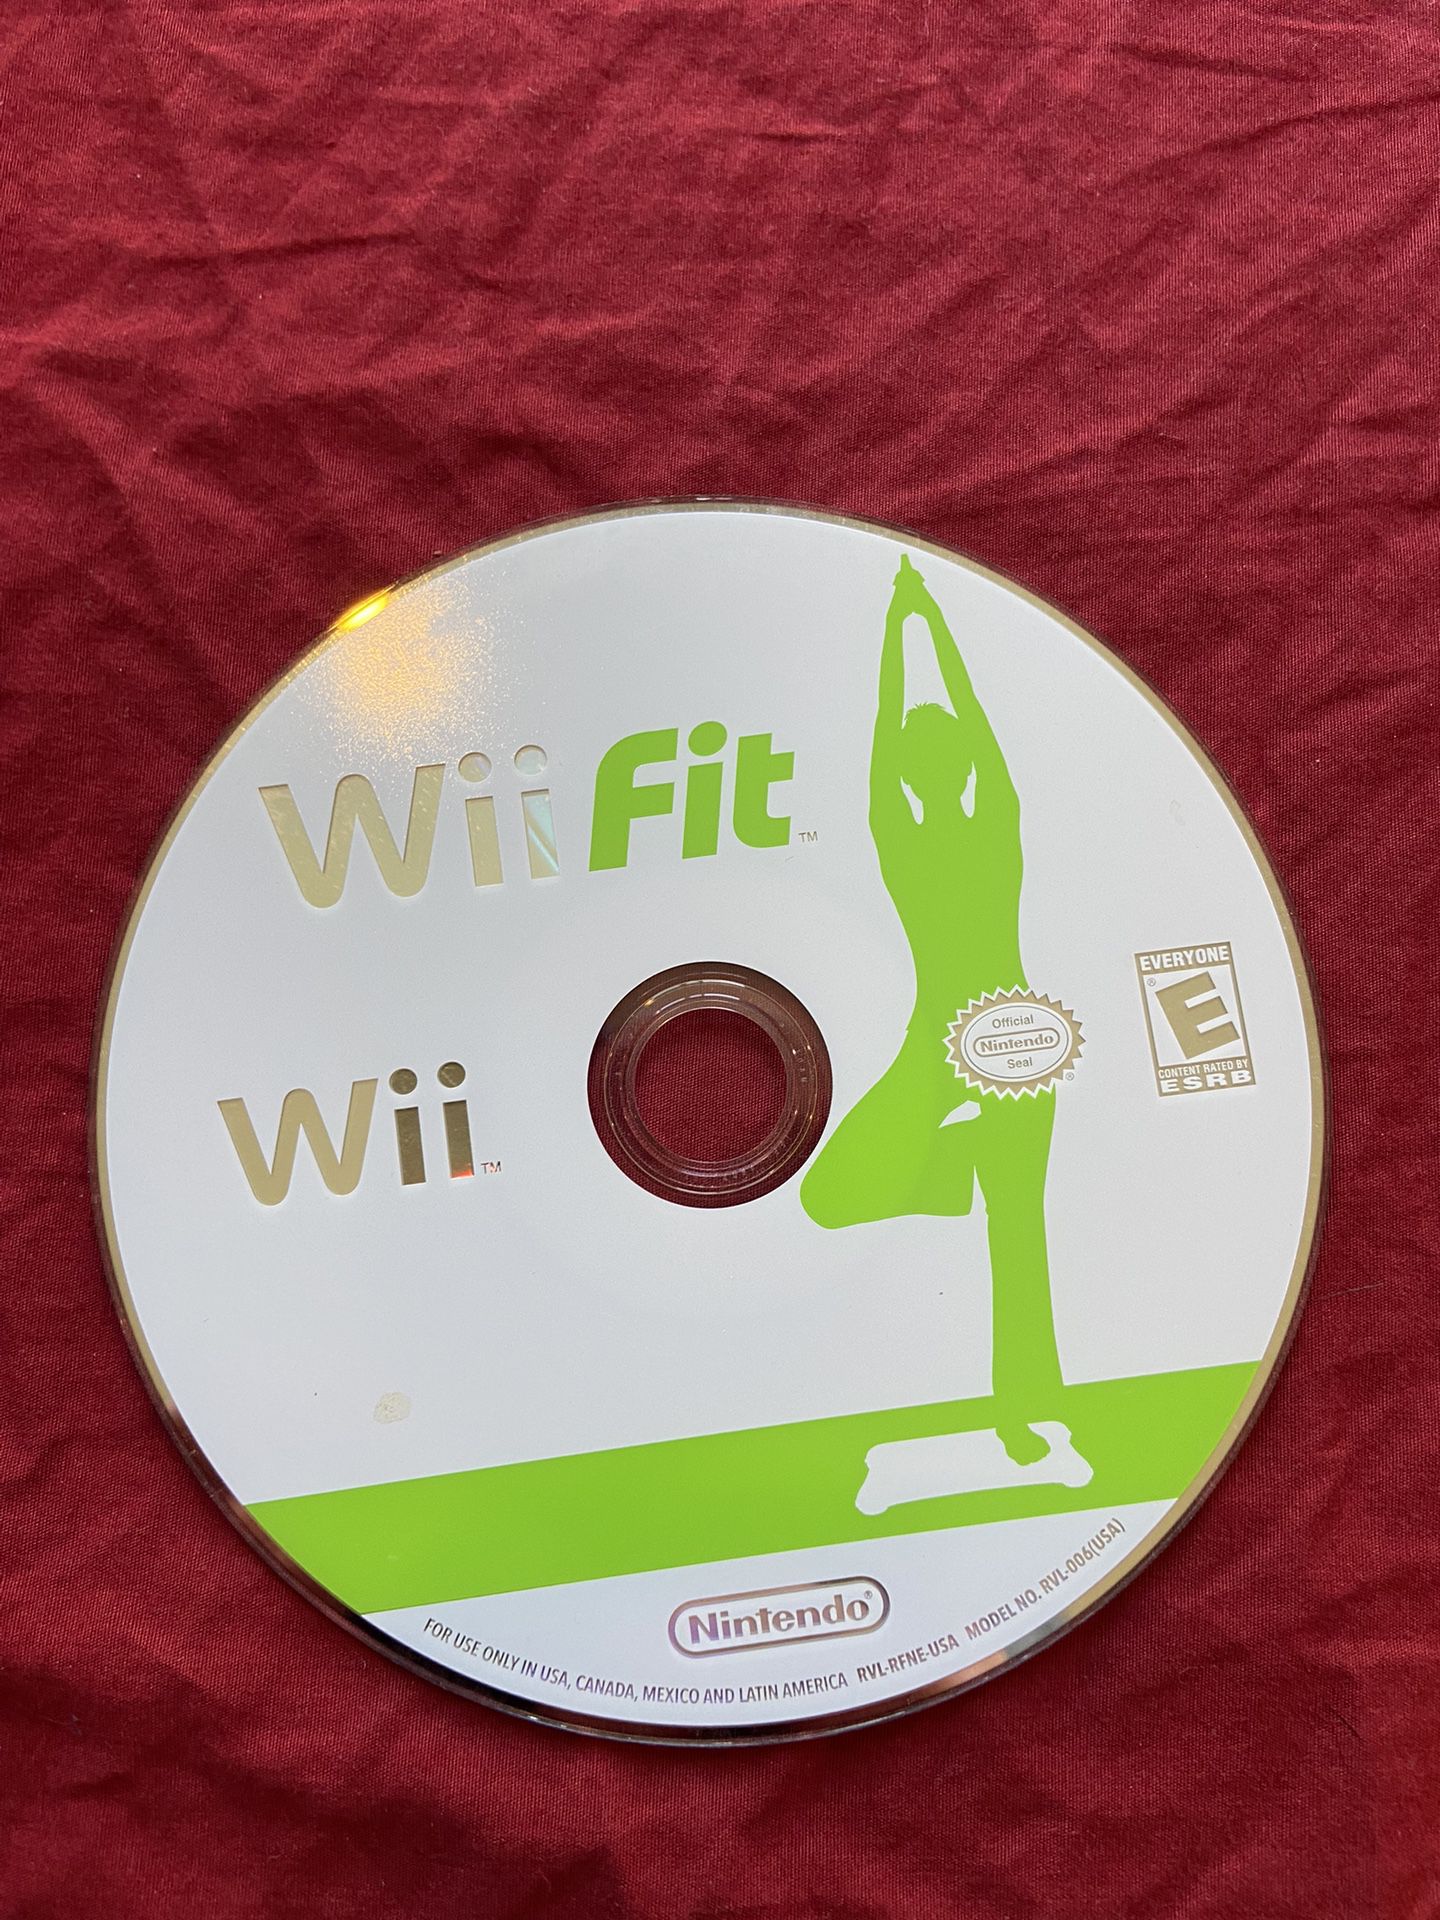 Wii Fit Disc DOES NOT WORK